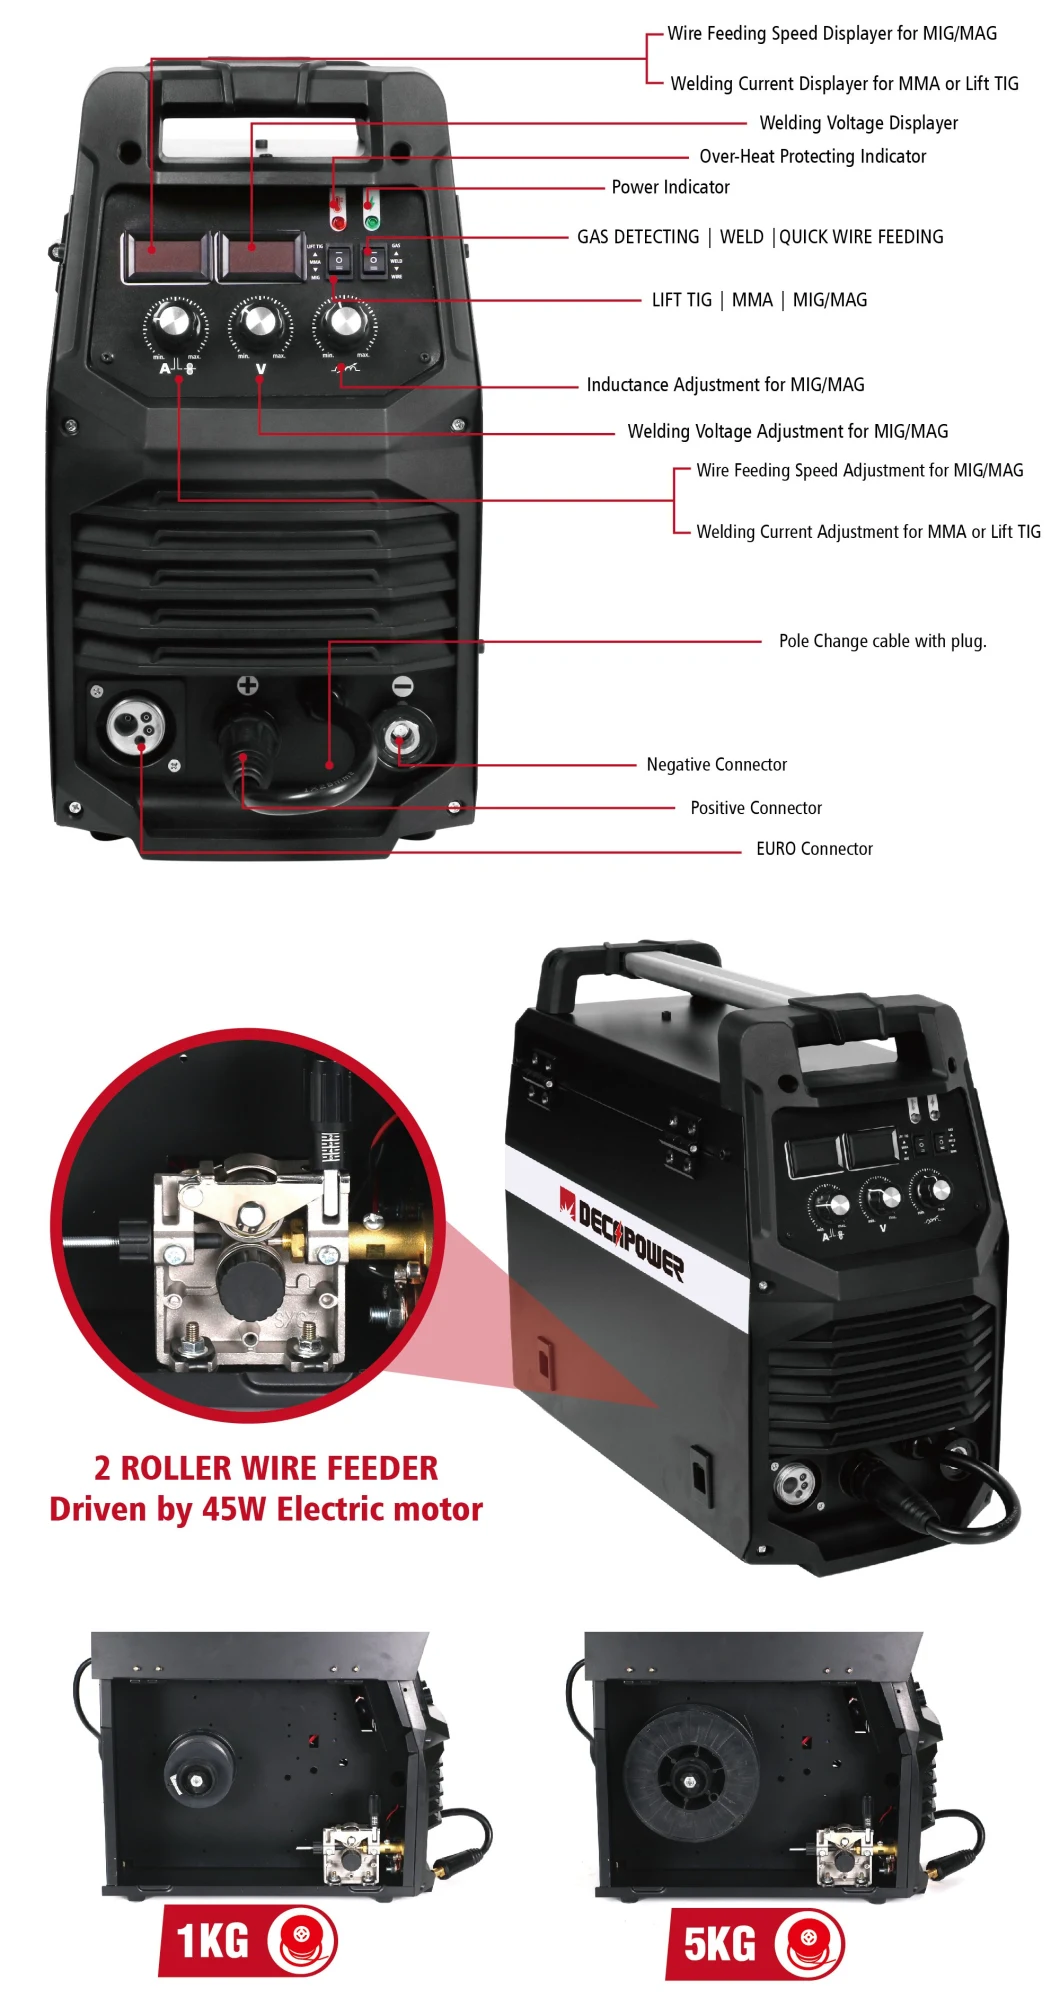 Decapower 4 in 1 MMA TIG Mag MIG Welders Gas Gasless CO2 180 AMPS MIG Welding Machine with Inductance Adjustment